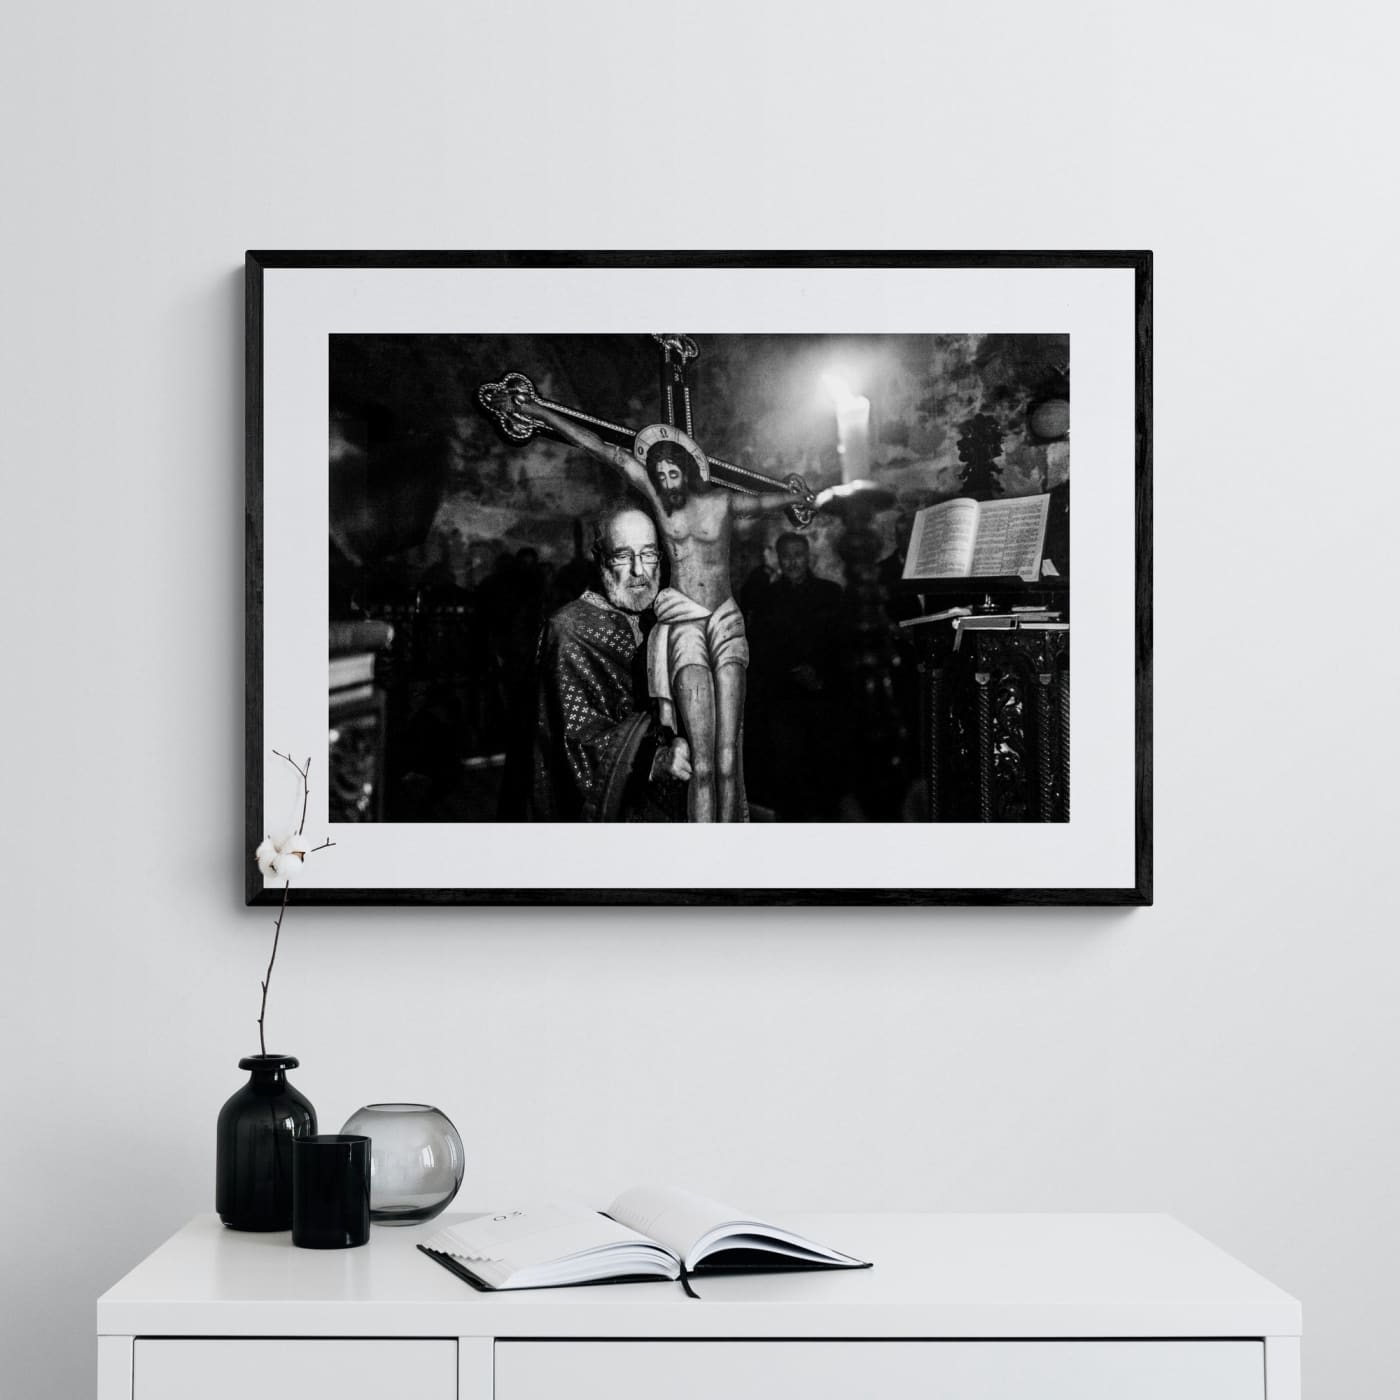 Black and White Photography Wall Art Greece | Cross Olympos Karpathos Dodecanese by George Tatakis - single framed photo